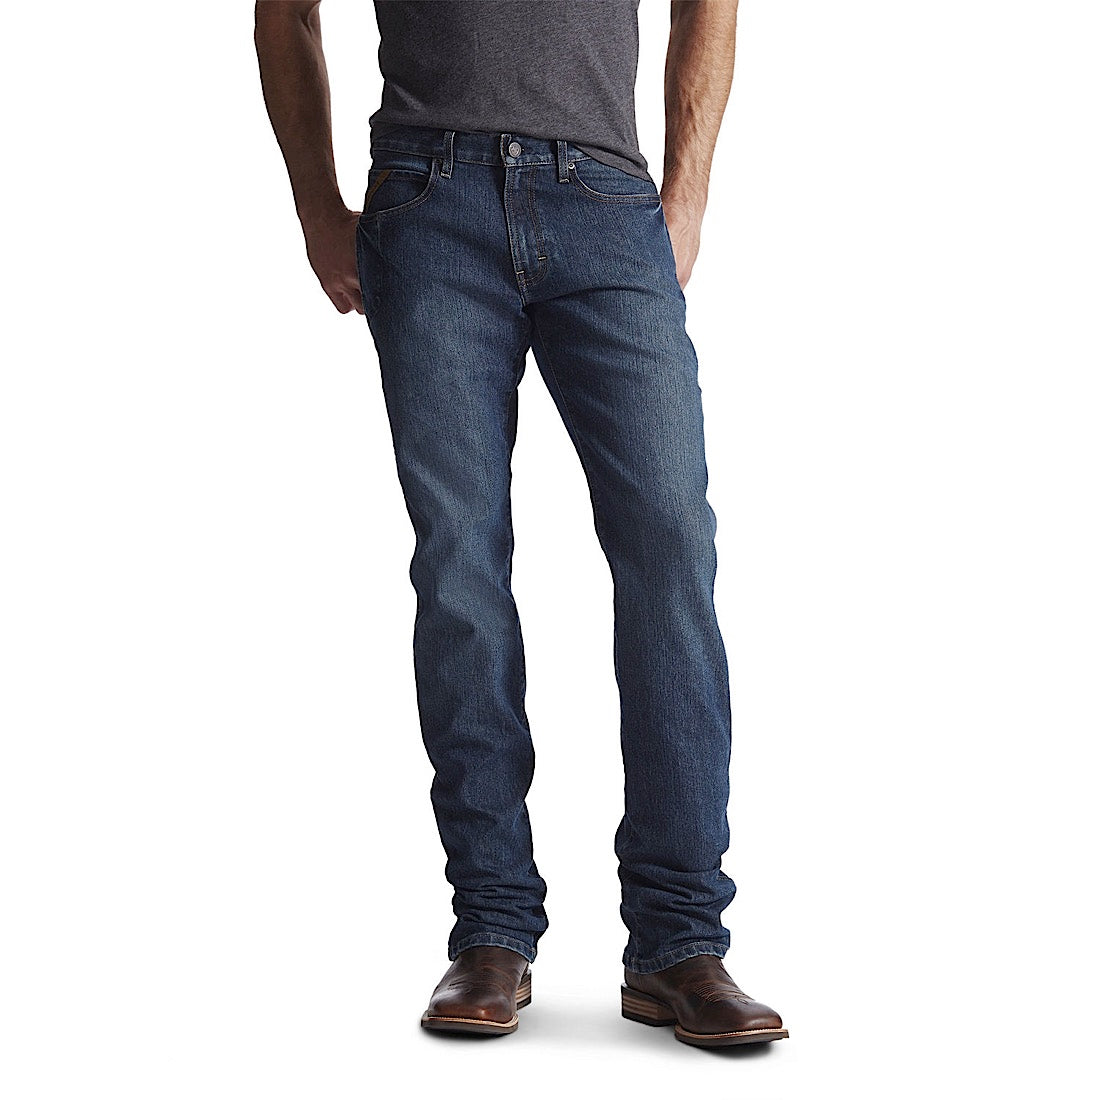 Buy Ariat Rebar M4 Durastretch Low Rise Cut Jean Carbine - The Stable